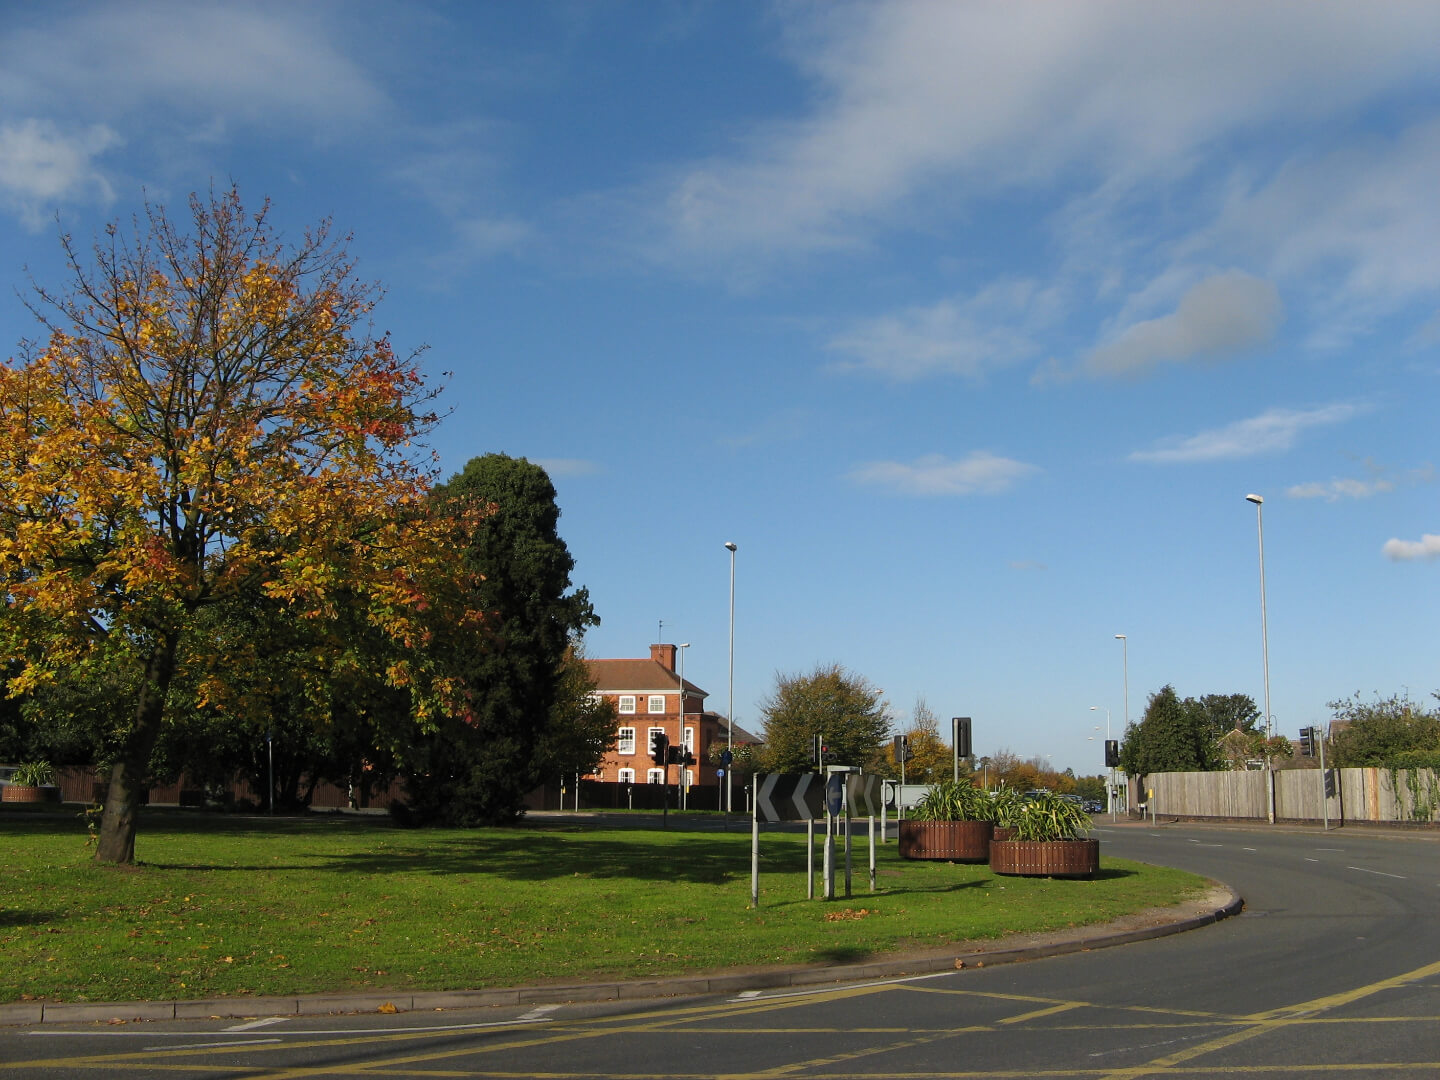 Student Accommodation in Kingfisher, Loughborough - roundabout